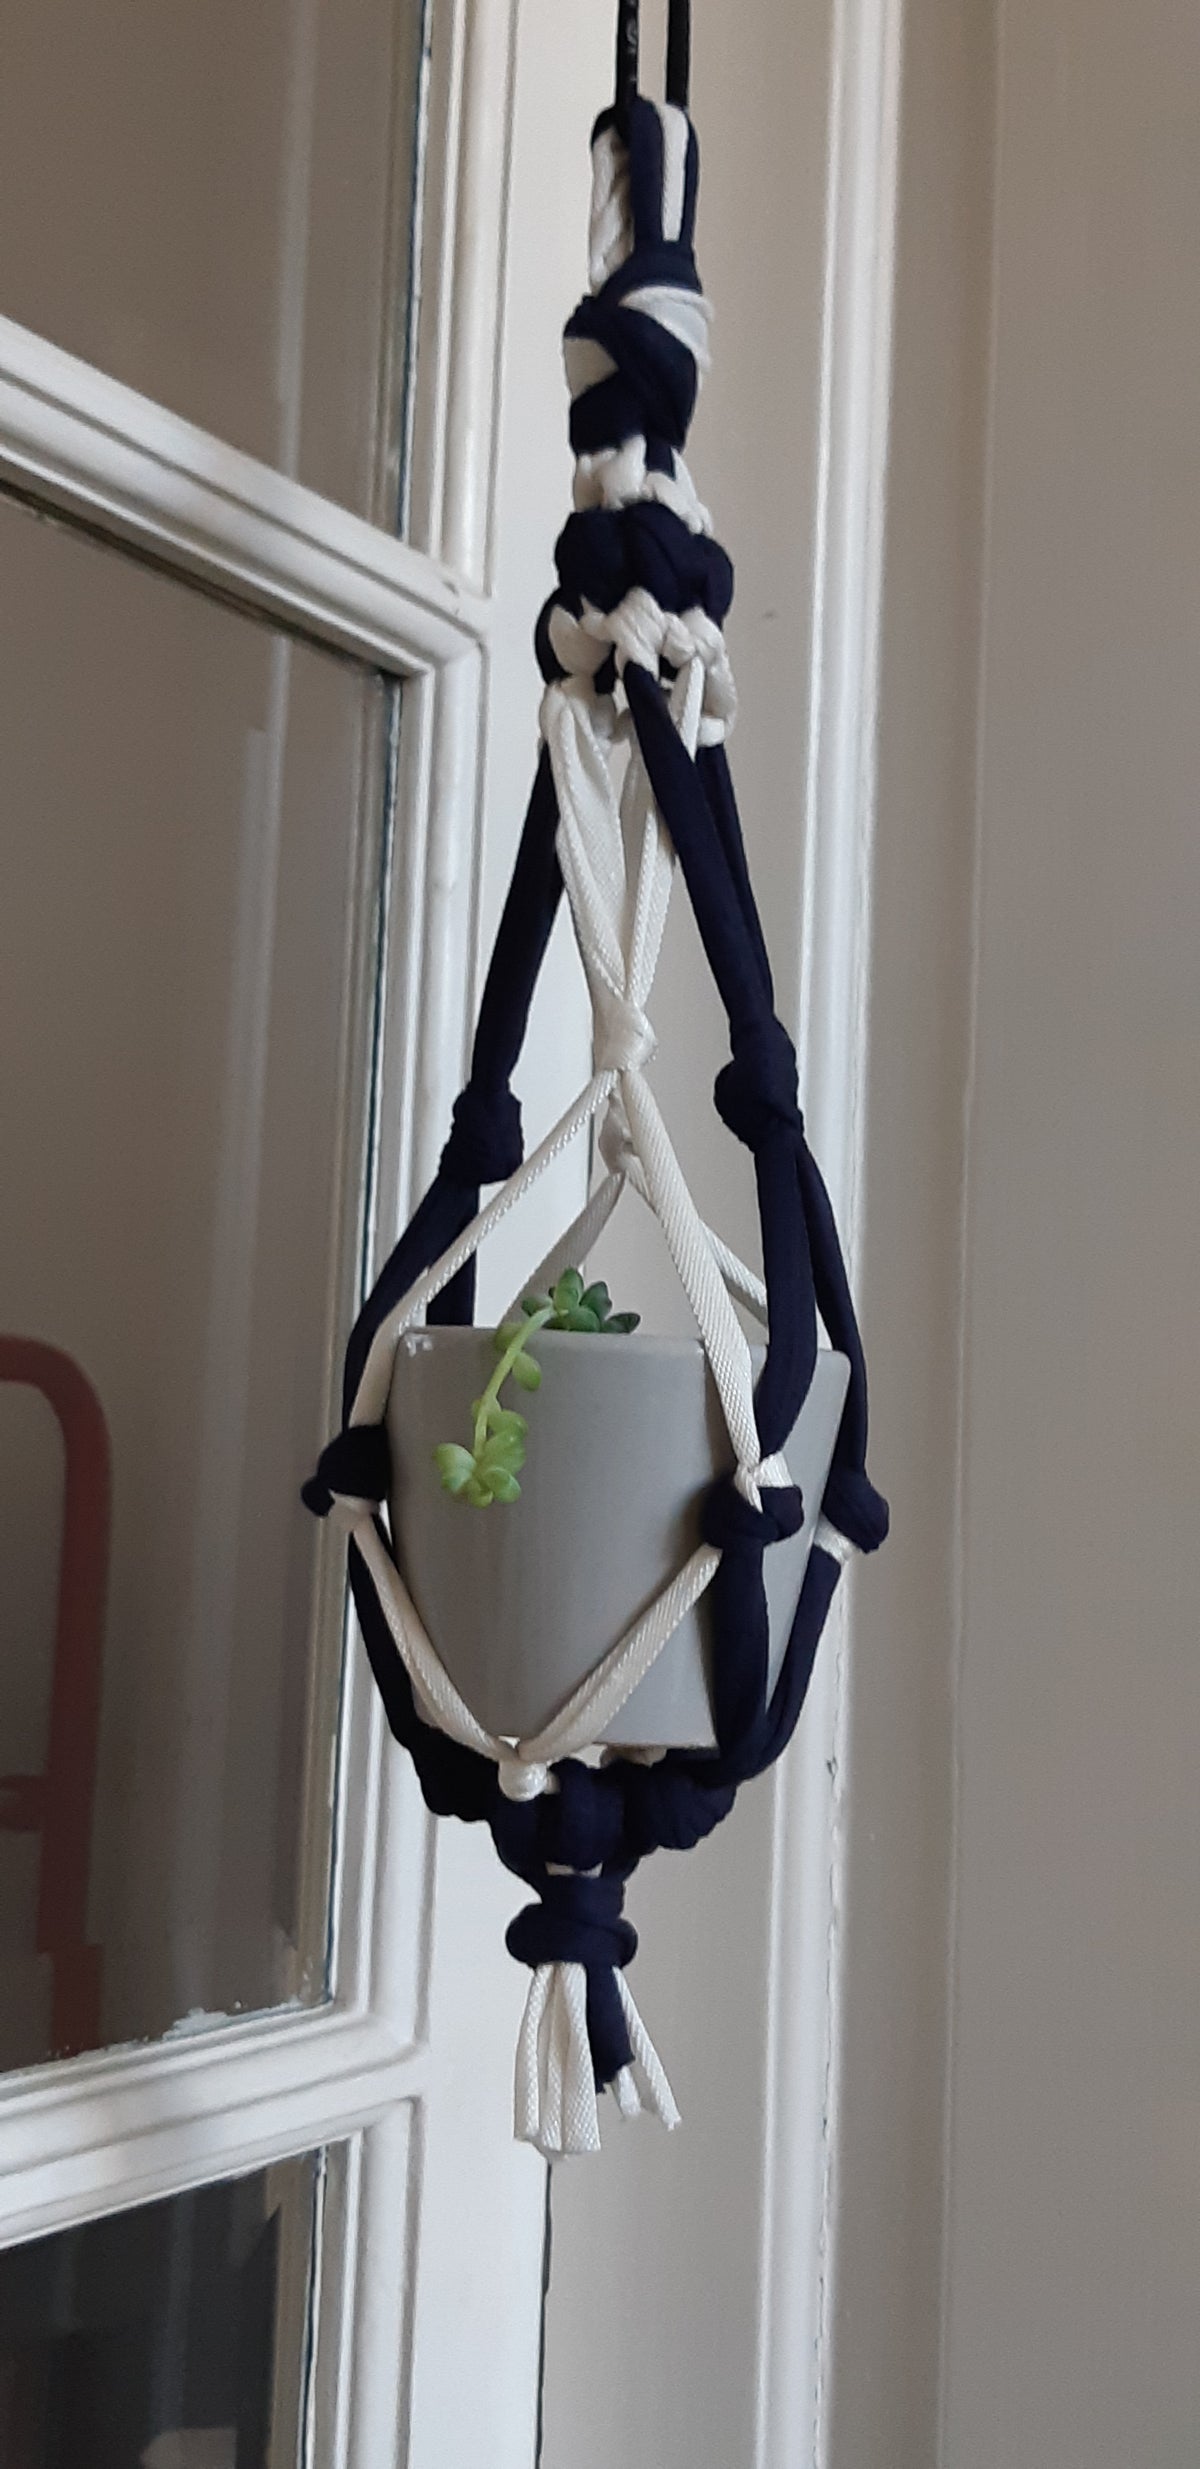 atelier creatif diy recyclage textile upcycling tshirt suspension plantes green deco lille tourcoing